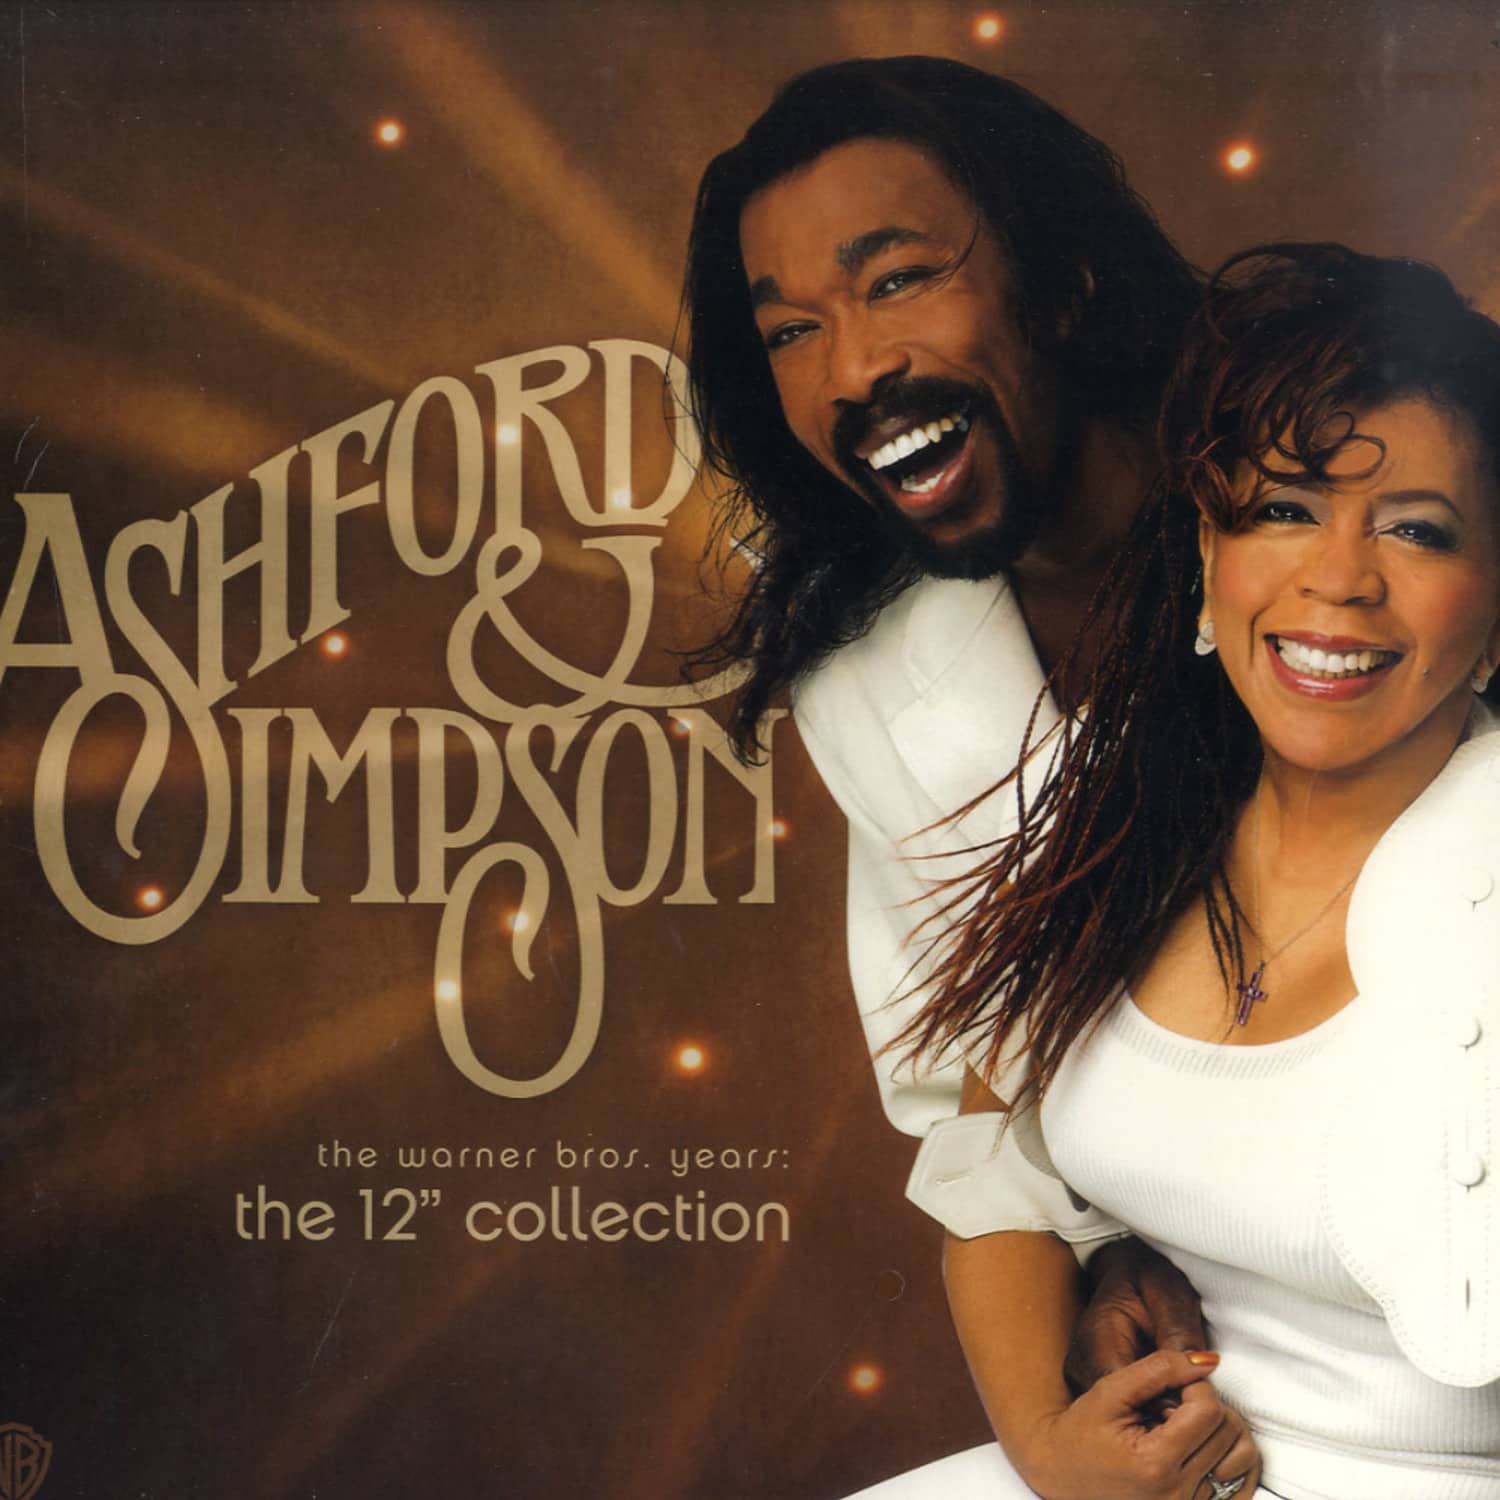 Ashford & Simpson - WARNER BROTHER YEARS THE COLLECTION 